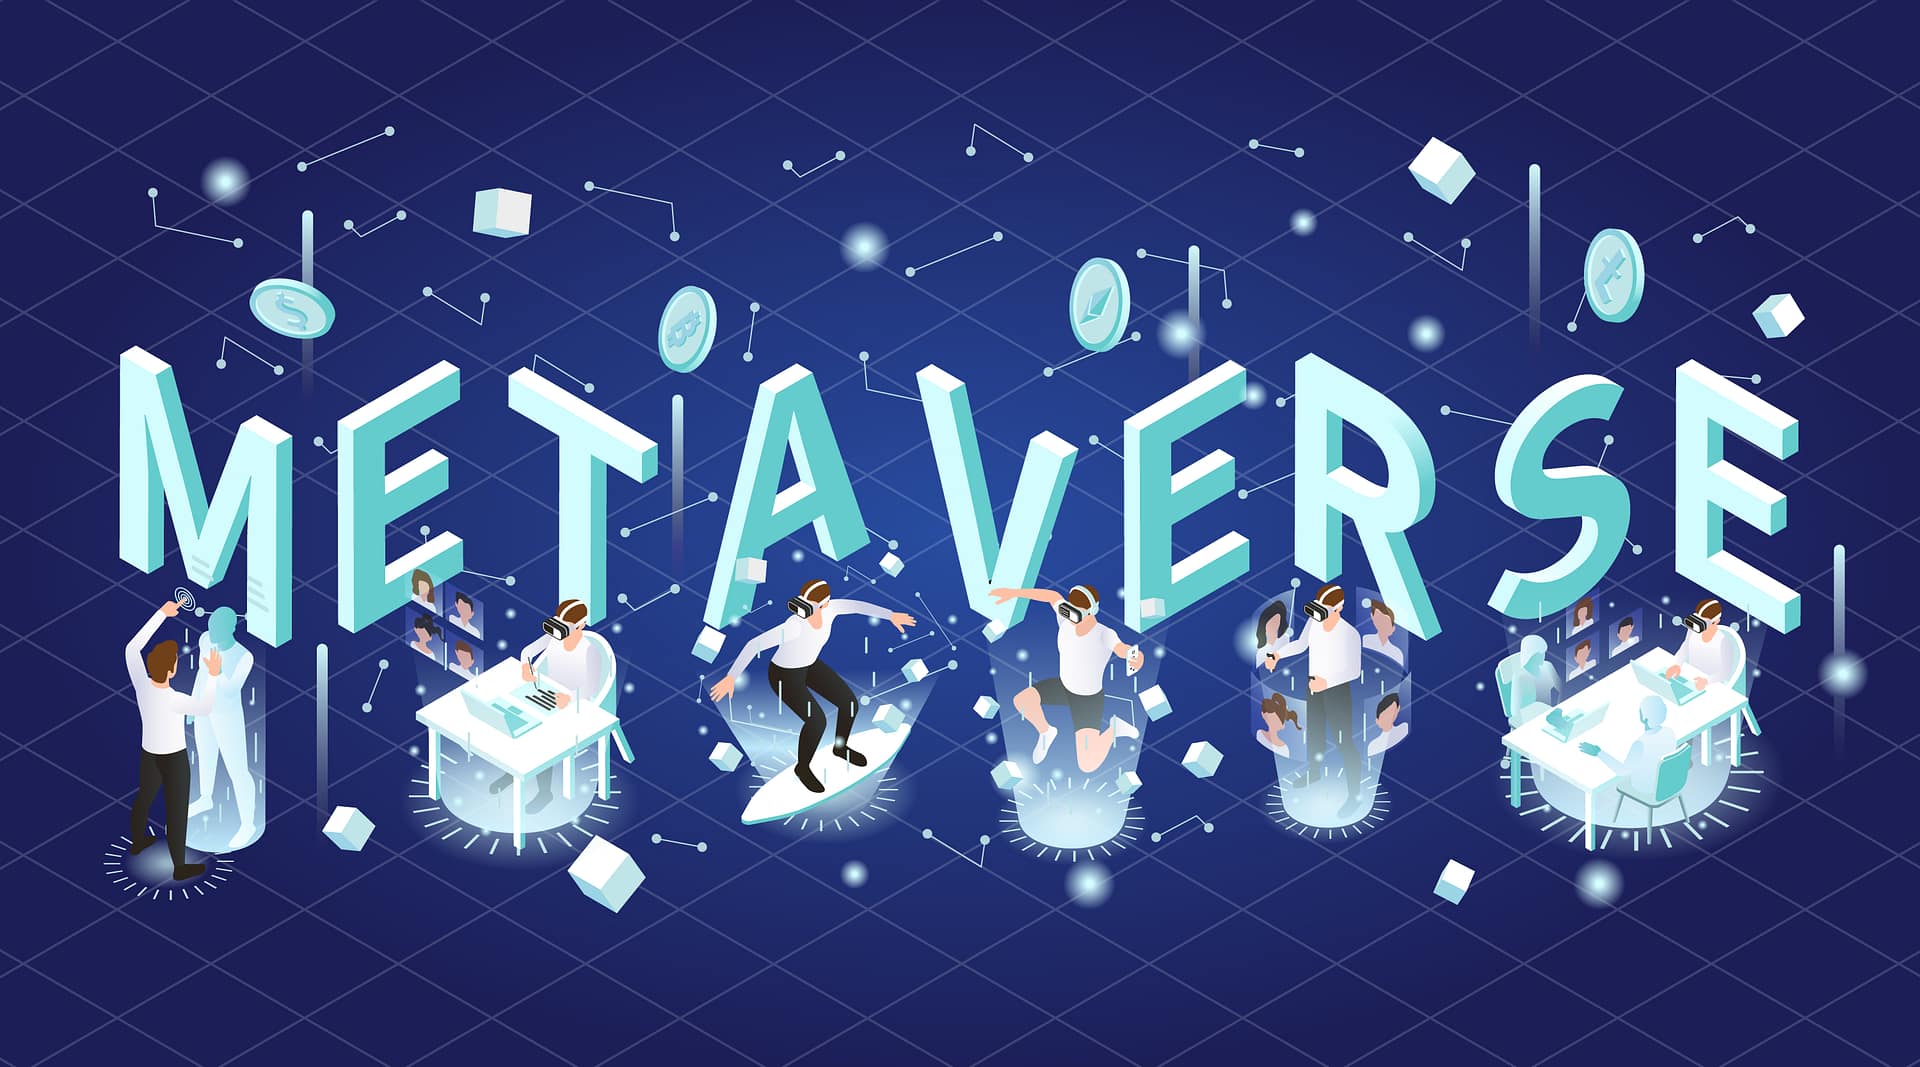 METAVERSE STANDARDS FORUM? HERE’S ALL YOU NEED TO KNOW